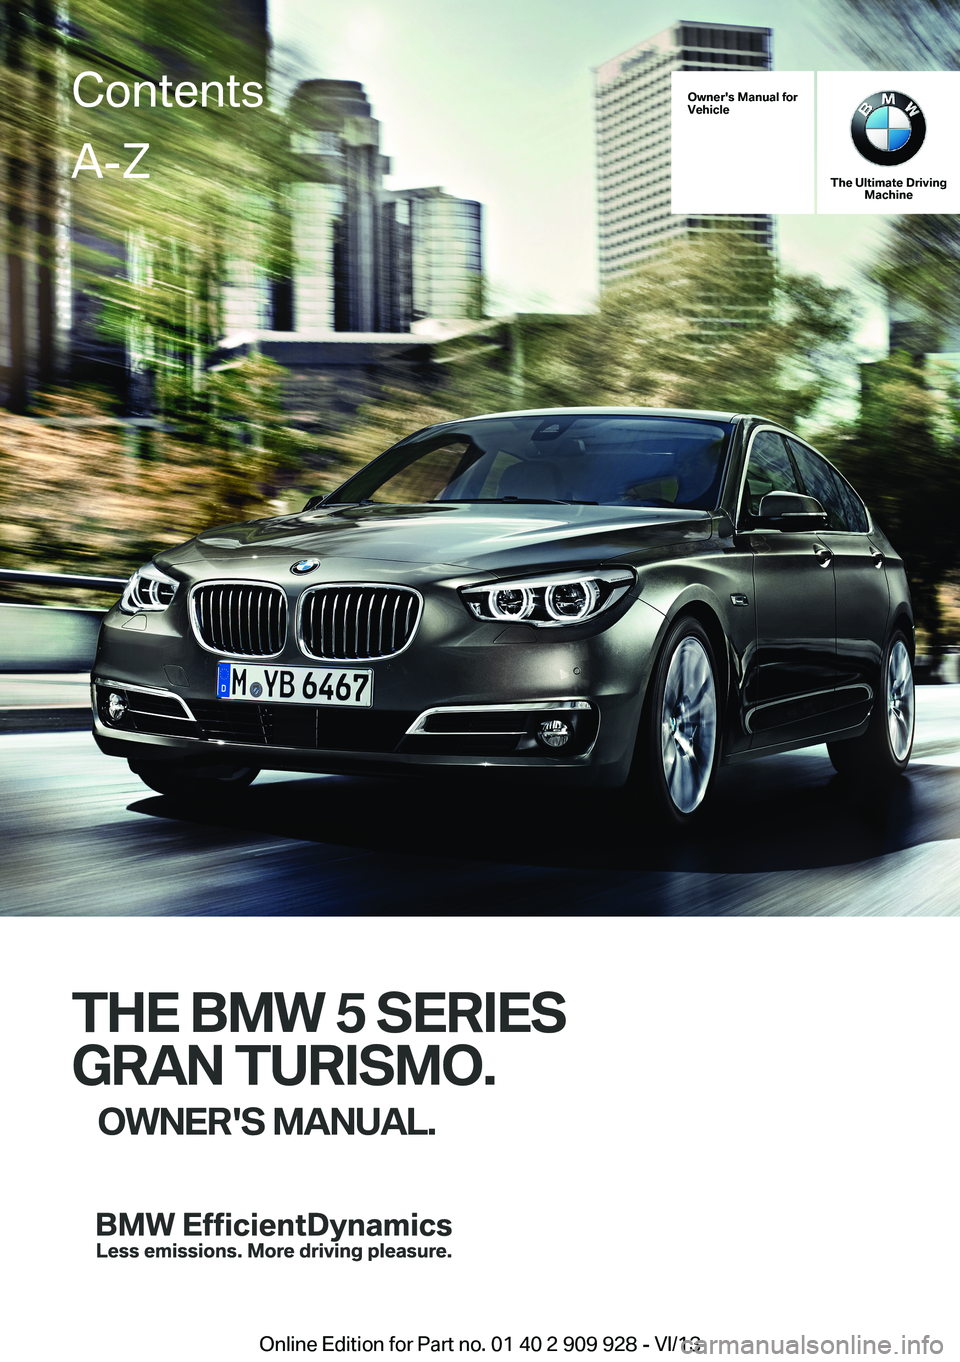 BMW 550I XDRIVE GRAN TURISMO 2014  Owners Manual Owner's Manual forVehicle
The Ultimate DrivingMachine
THE BMW 5 SERIES
GRAN TURISMO.
OWNER'S MANUAL.
ContentsA-Z
Online Edition for Part no. 01 40 2 909 928 - VI/13   